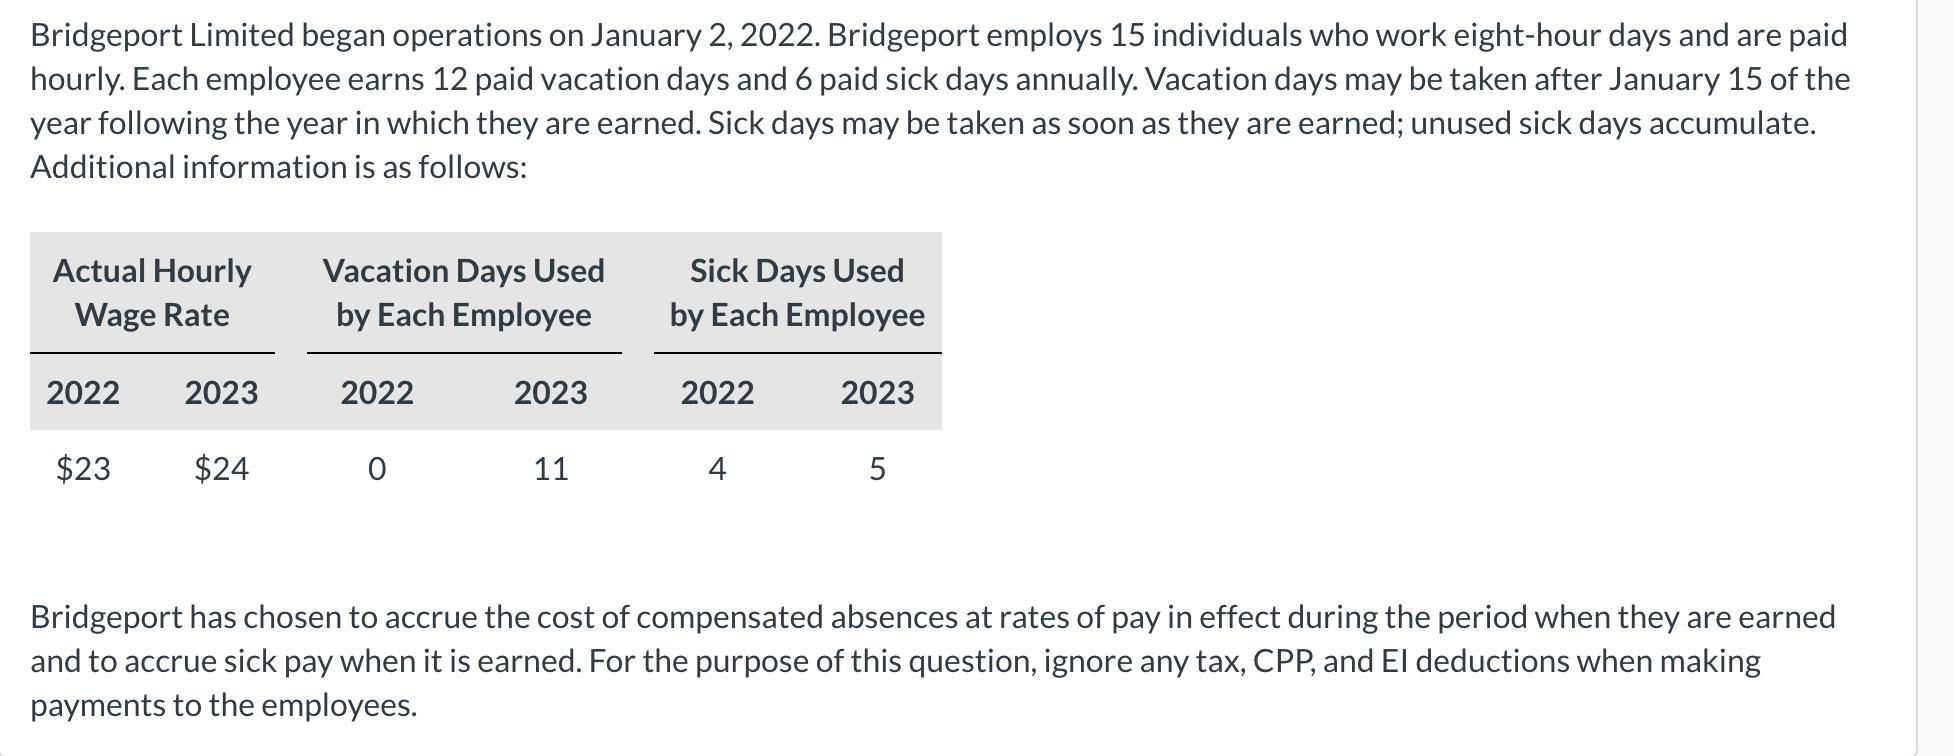 Bridgeport Limited began operations on January 2, 2022. Bridgeport employs 15 individuals who work eight-hour days and are pa